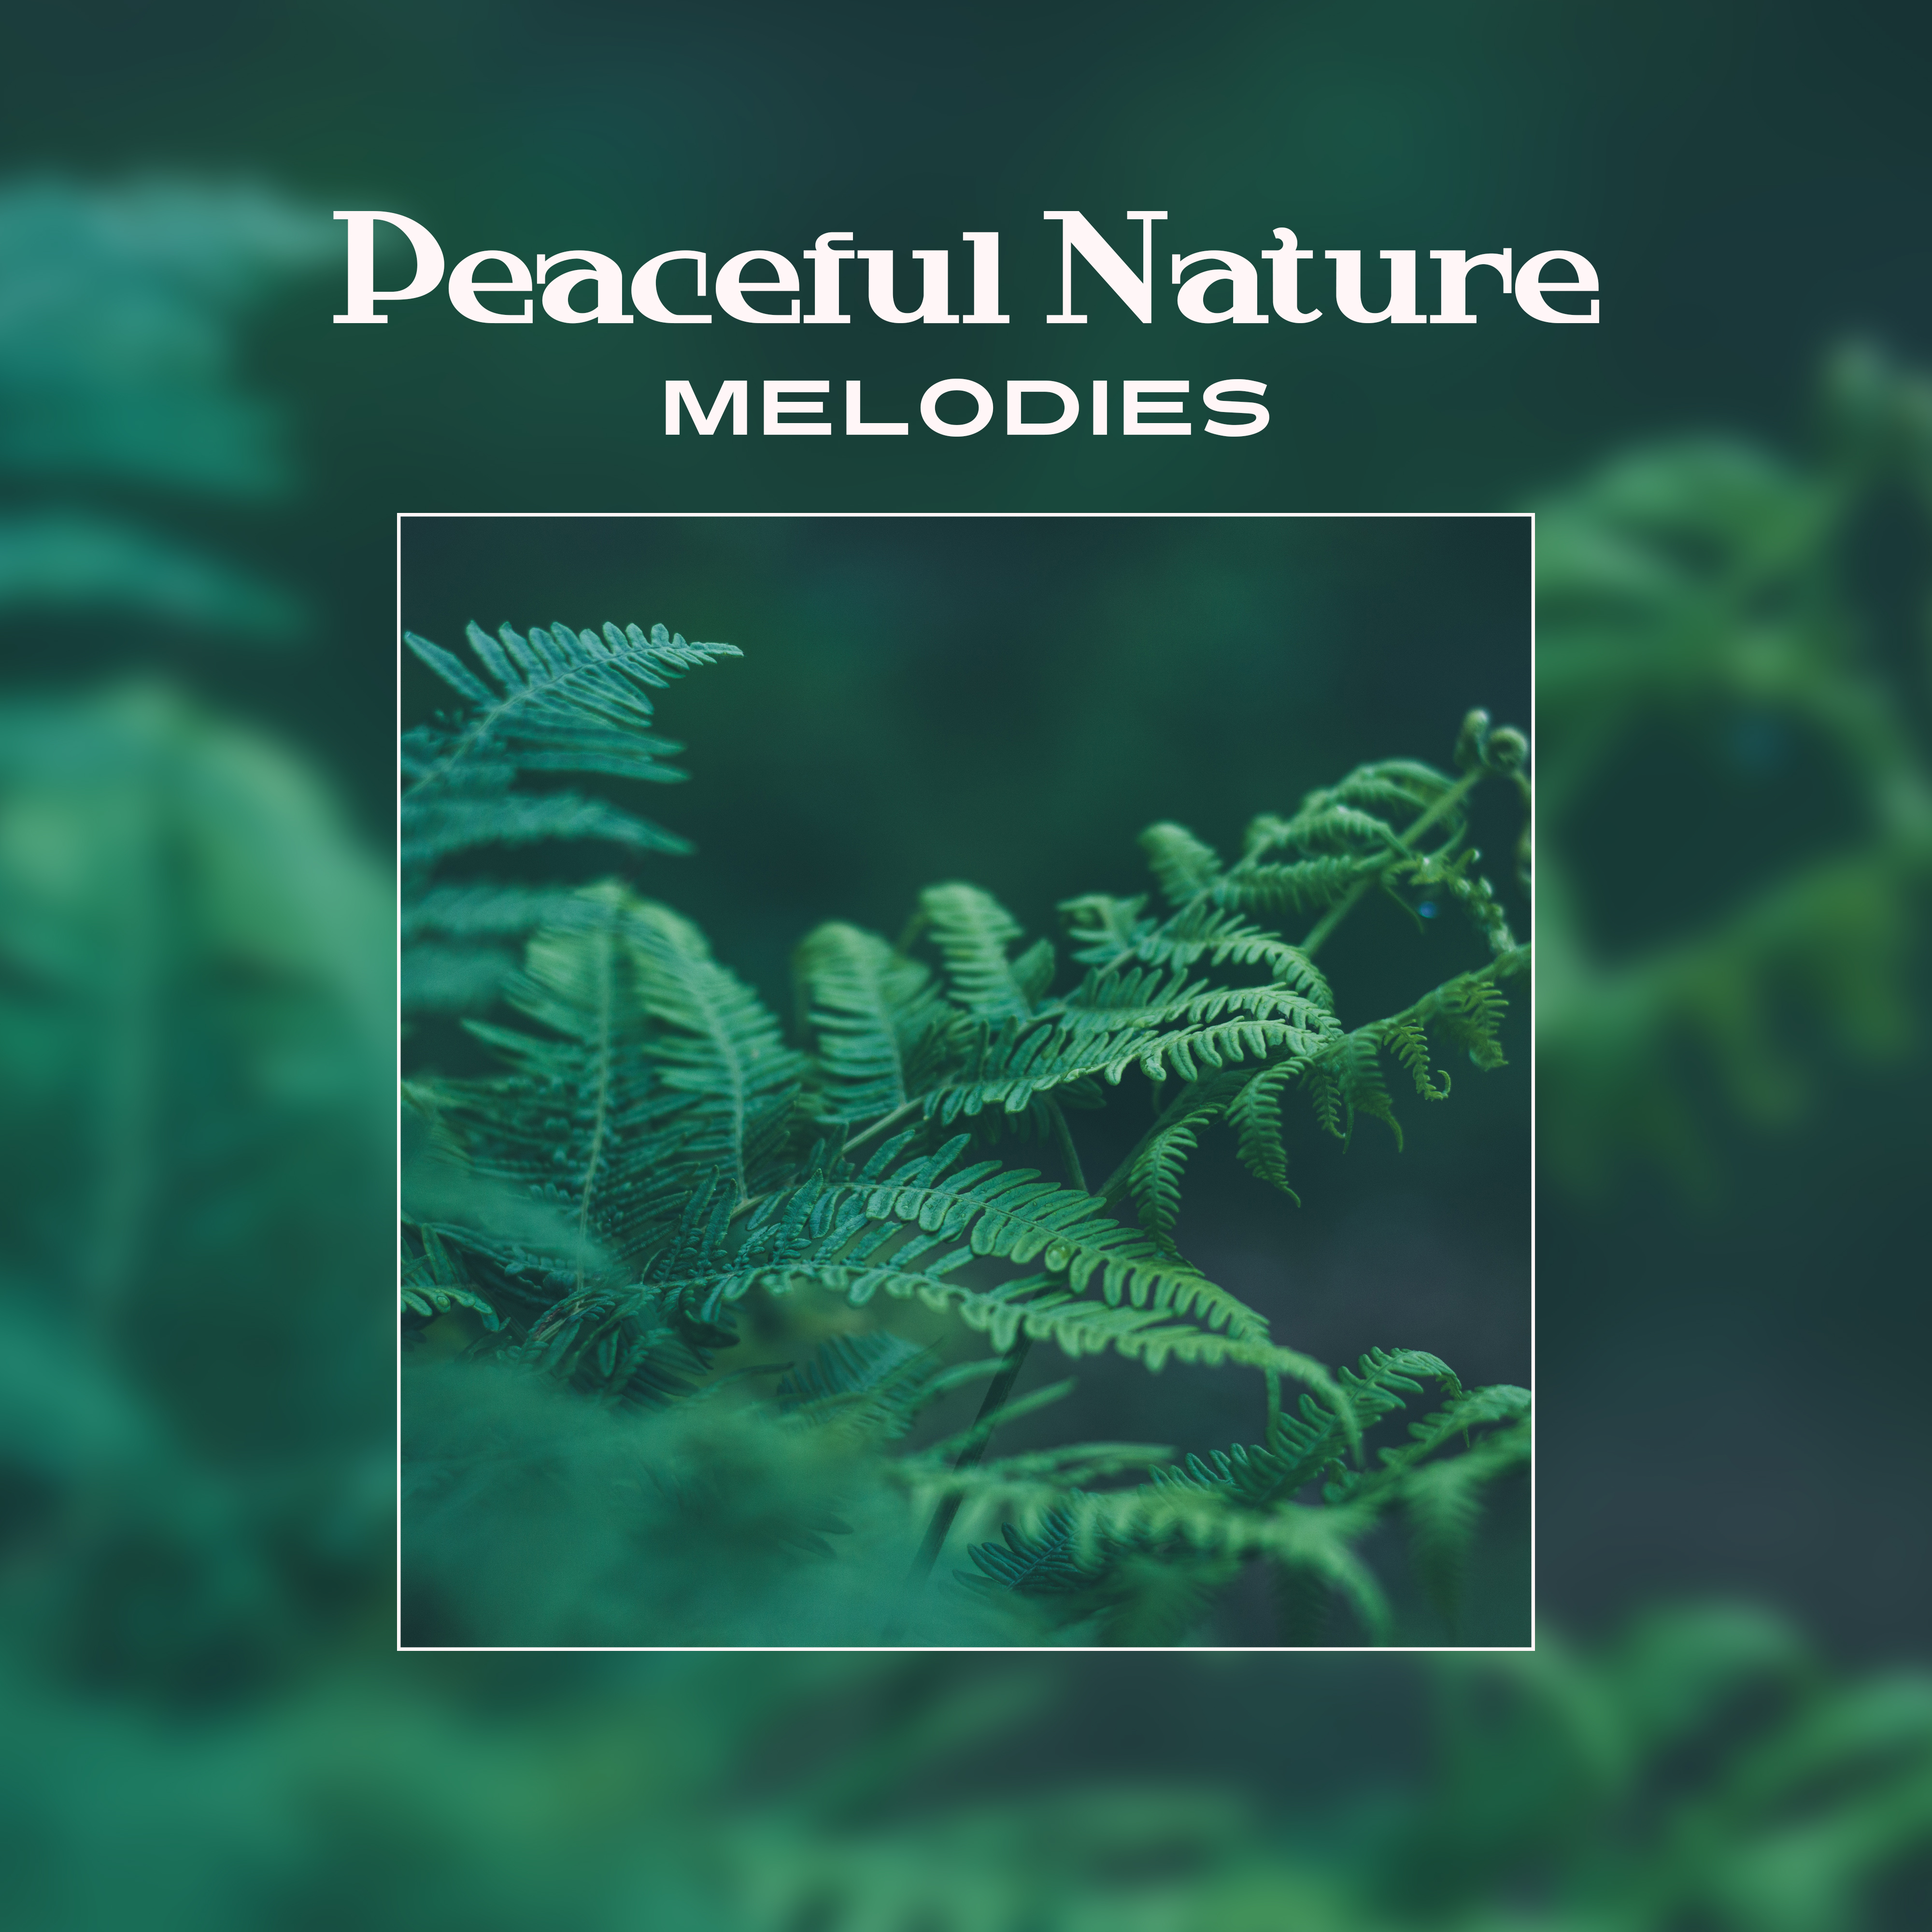 Peaceful Nature Melodies  Soft Sounds to Calm Mind, Body Relaxation Music, Time to Rest, Healing Melodies